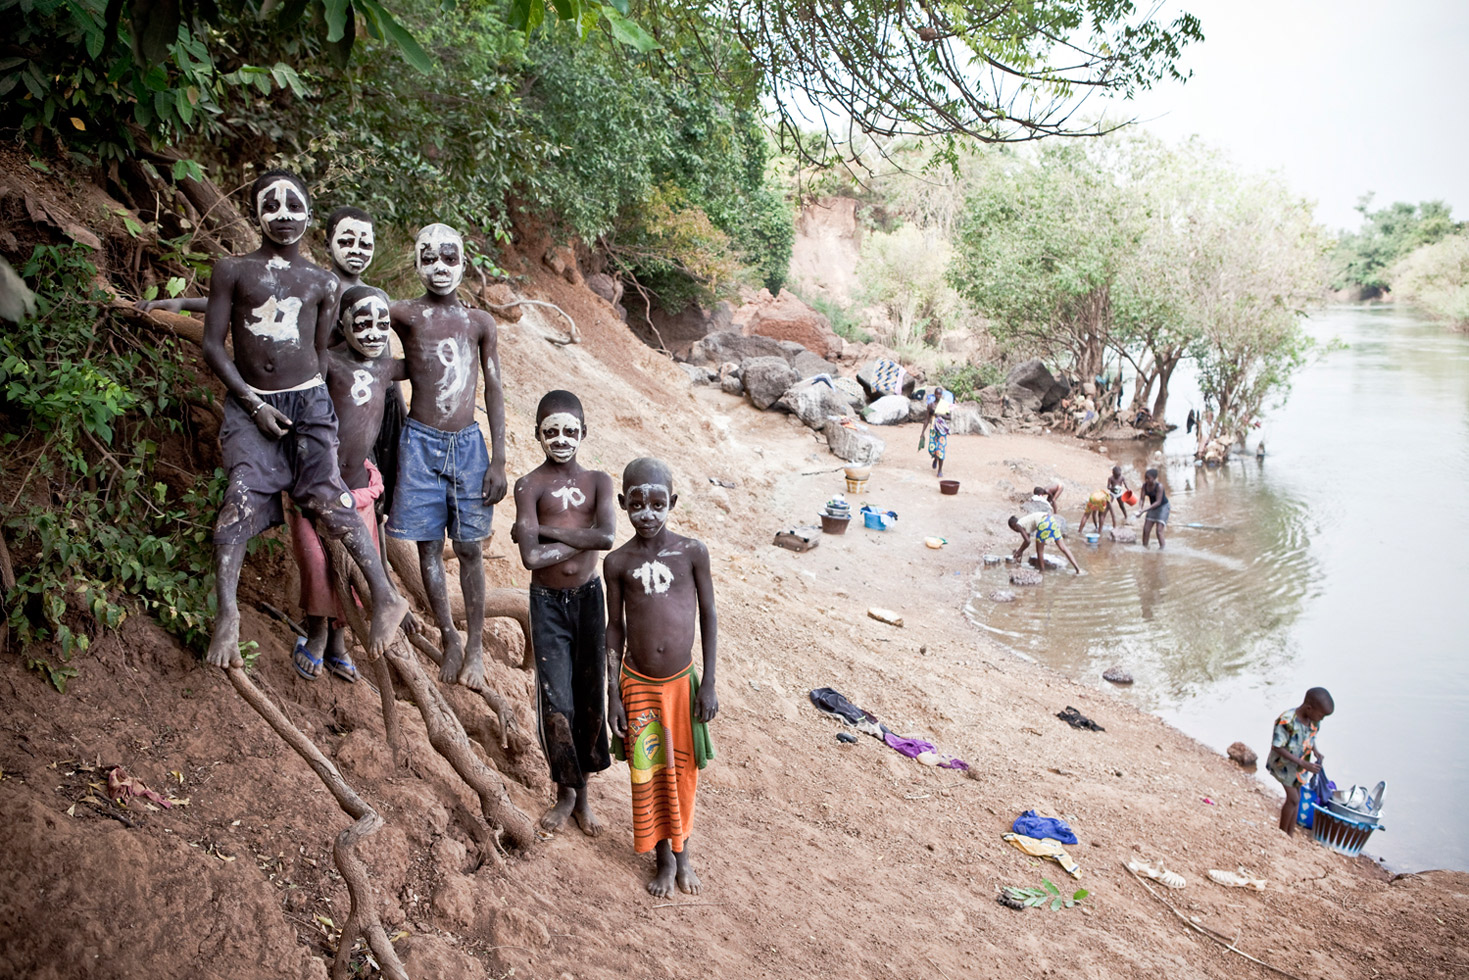 Young boys pose for a portrait on the banks of the River Gambia in Senegal. They said they had painted their faces like skulls for their own amusement.